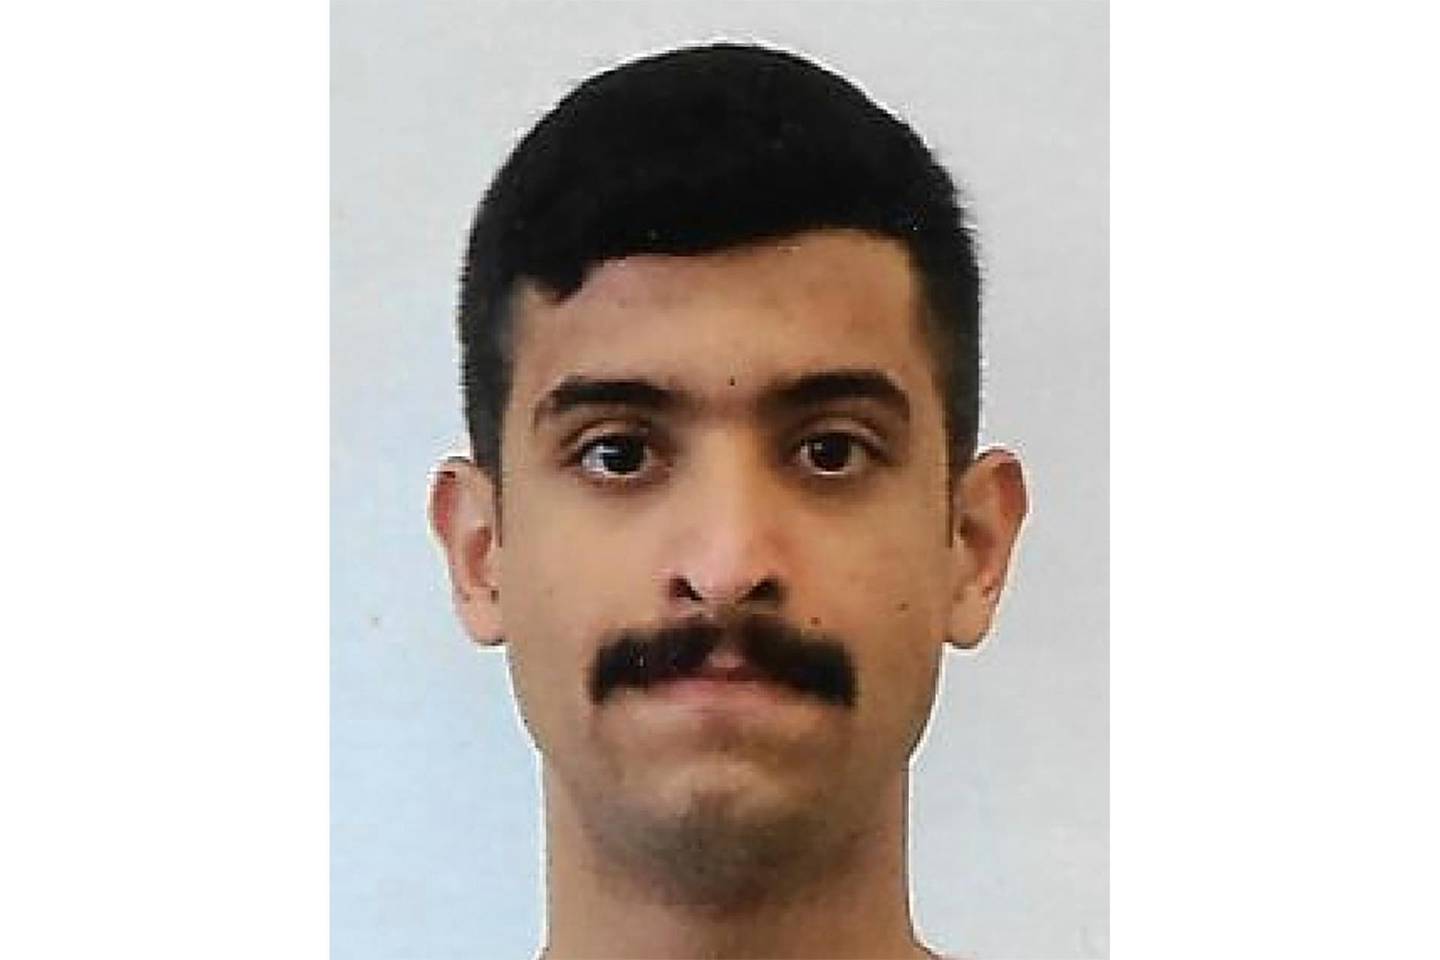 FILE - This undated file photo provided by the FBI shows Mohammed Alshamrani. The United States is preparing to remove more than a dozen Saudi military students from a training program and return them to their home country after an investigation into a deadly shooting by Saudi aviation student Alshamrani at a Florida navy base in December 2019, a U.S. official told The Associated Press. (FBI via AP, File)